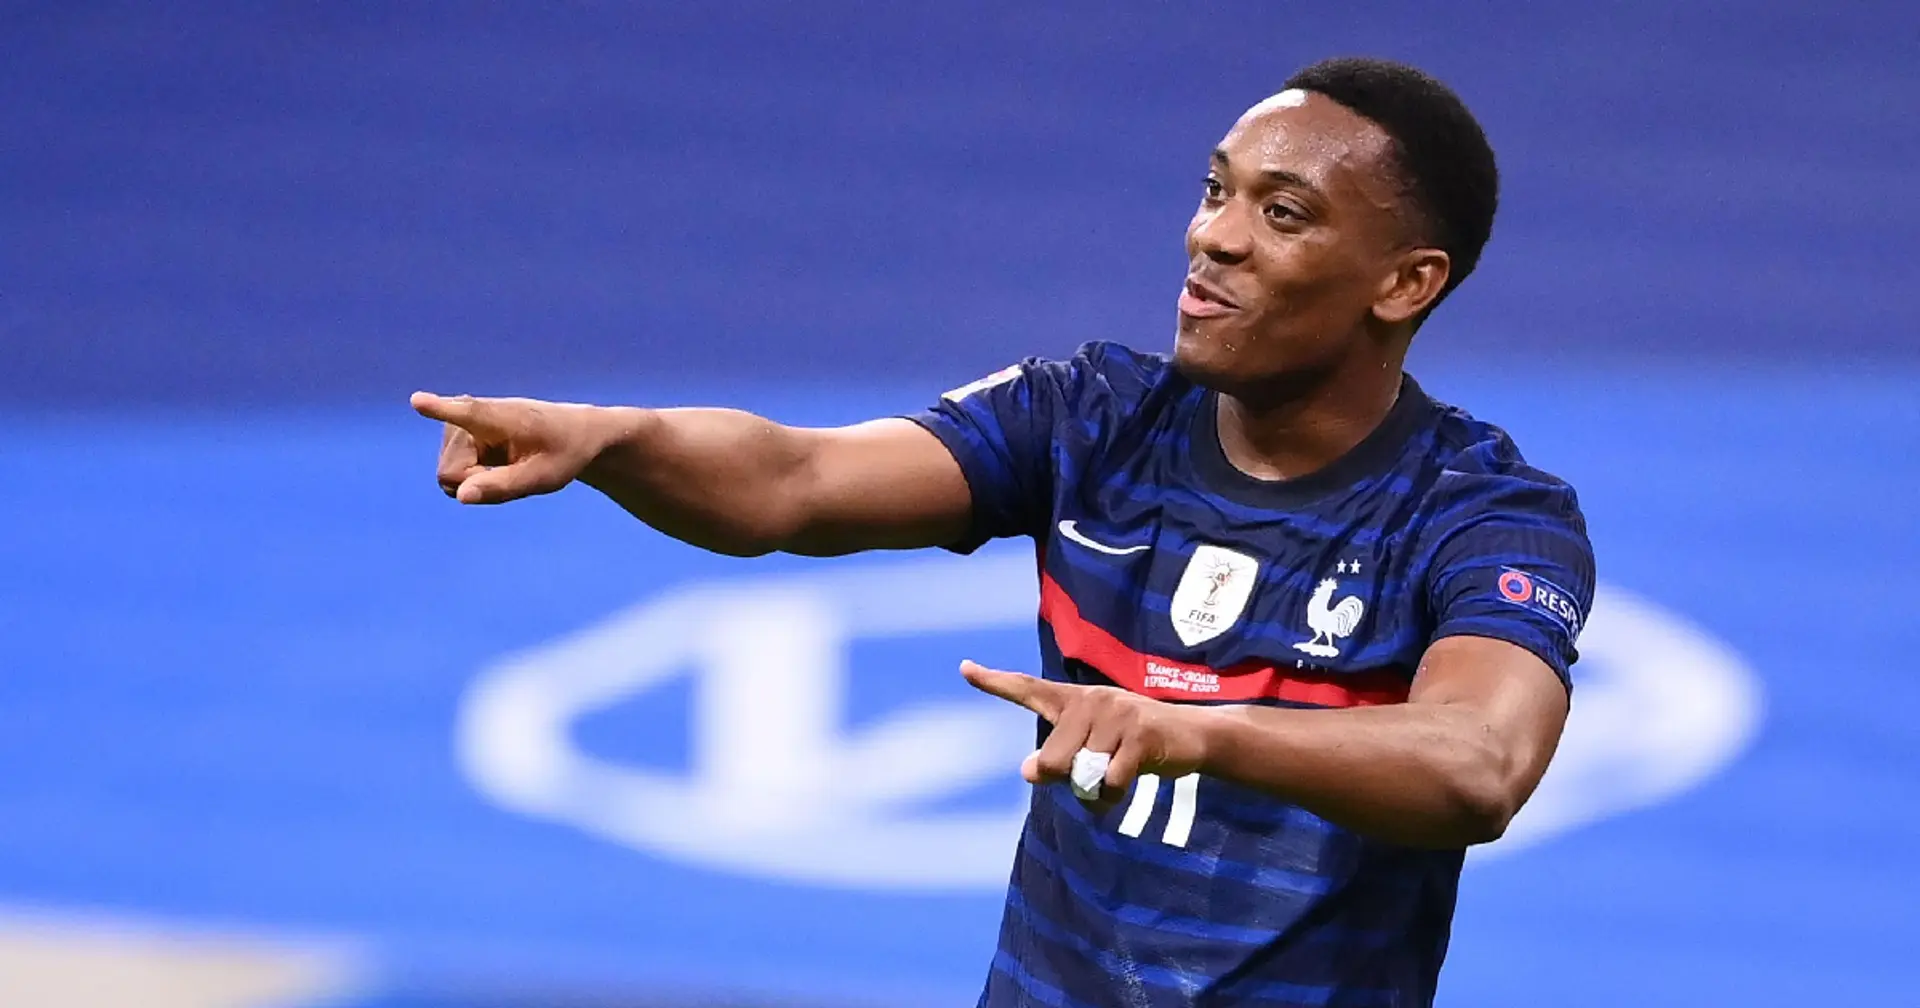 'Coming for the Golden Boot': United fans laud Martial for impressive performance vs Croatia